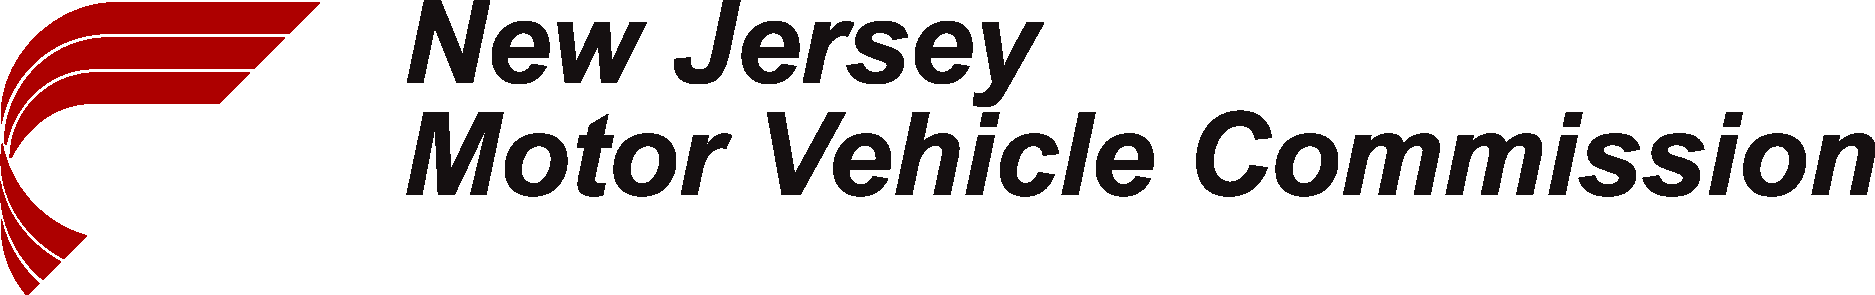 New Jersey Motor Vehicle Commission Logo Vector